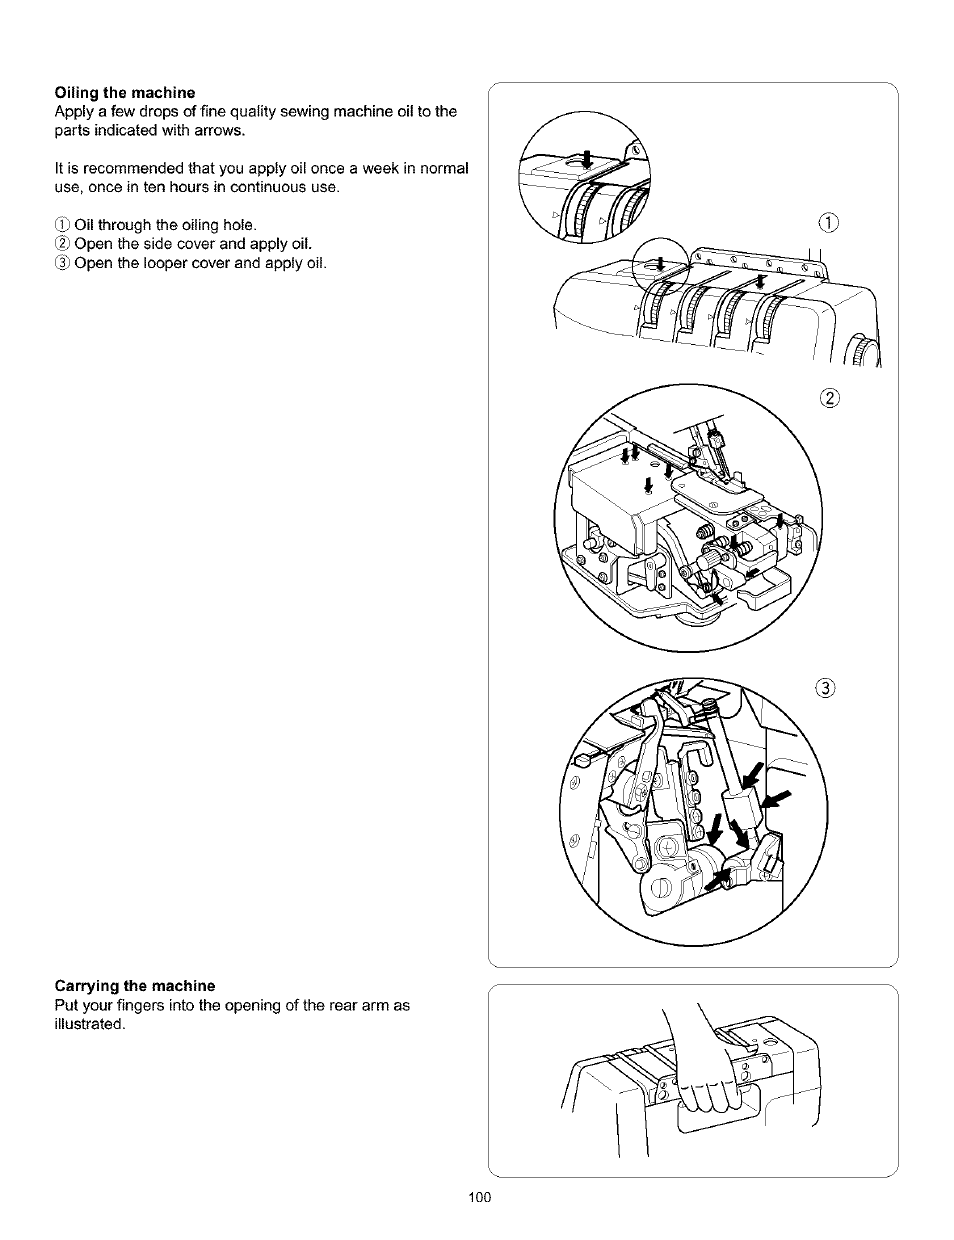 Oiling the machine, Carrying the machine | Kenmore 385.166551 User Manual | Page 108 / 113